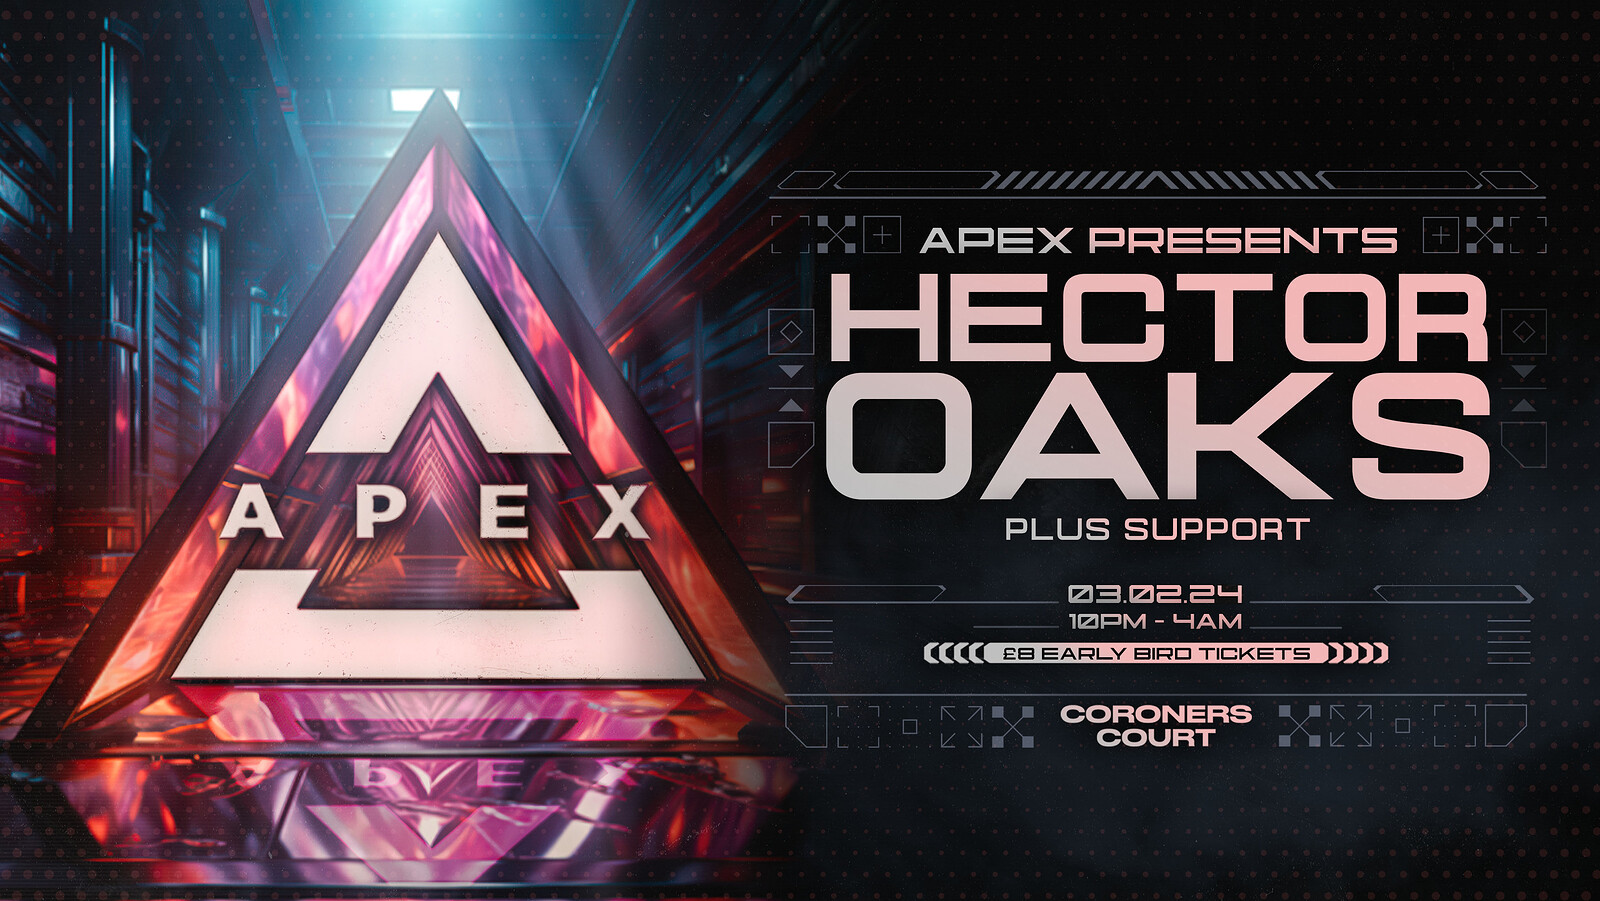 Apex presents: Hector Oaks + More at The Coroner's Court